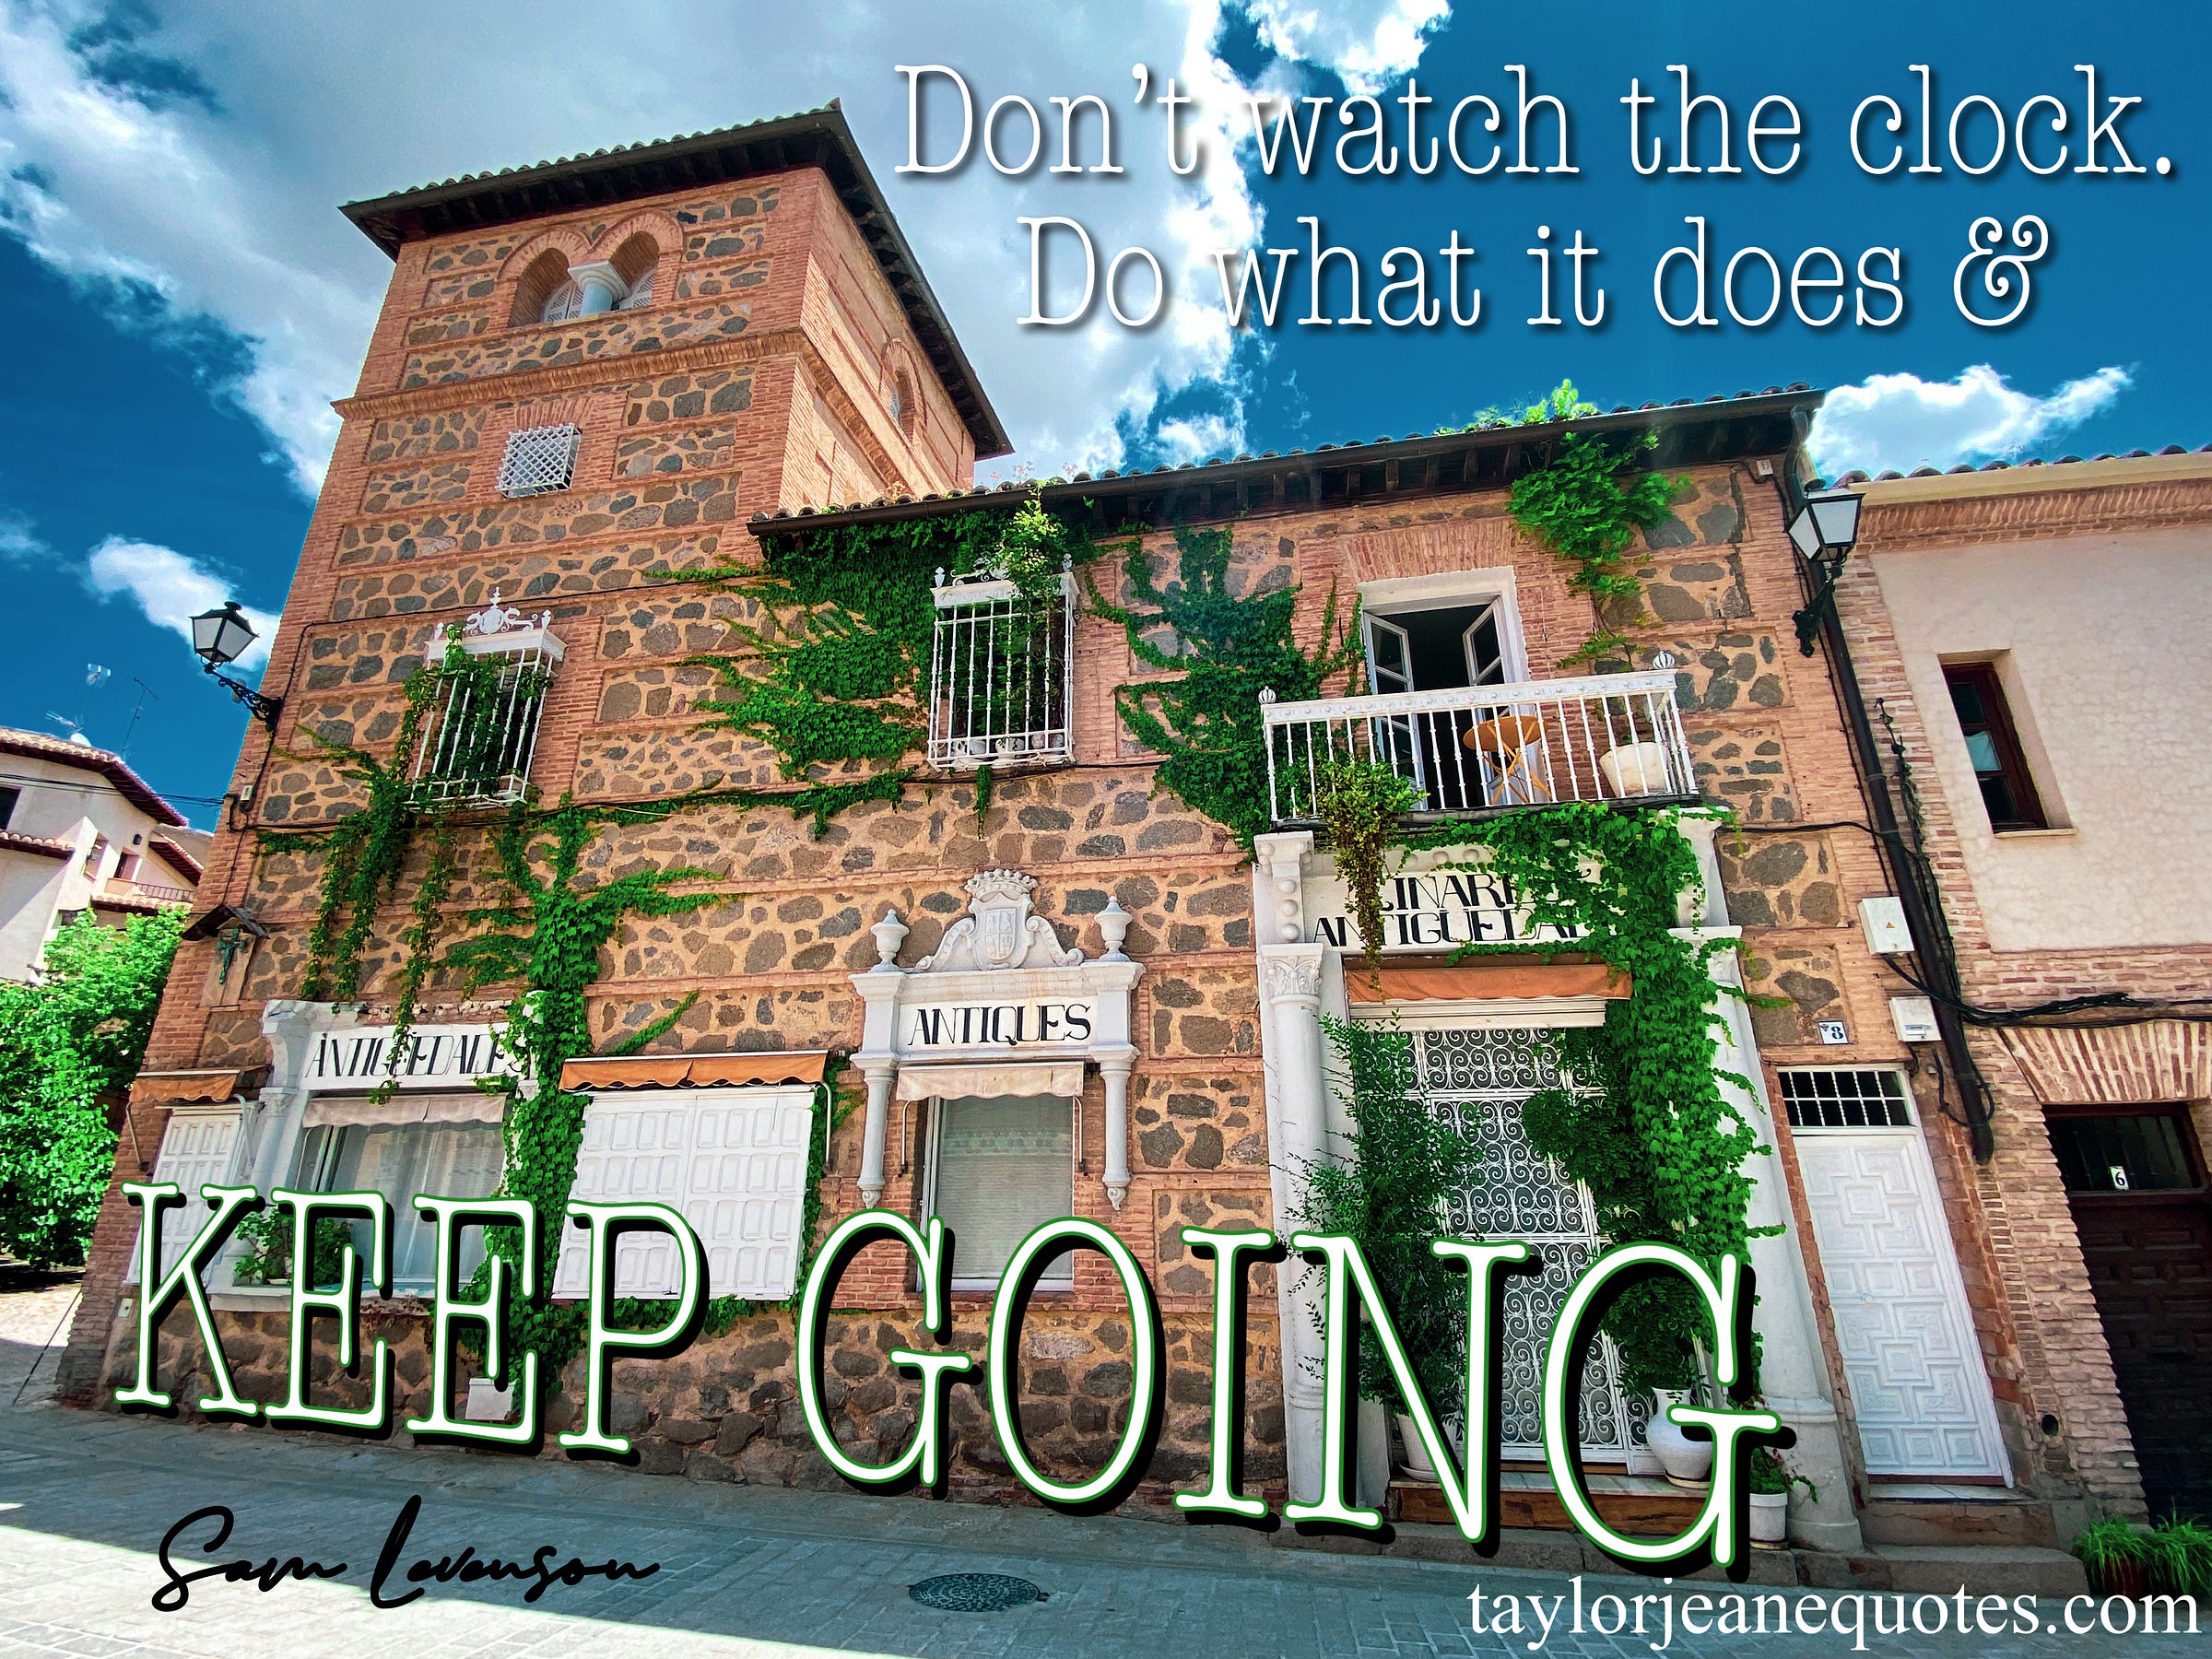 taylor jeane quotes, taylor jeane, taylor wilson, quotes, sam levenson, sam levenson quotes, toledo spain, building with vines, old building with vines, clock quotes, don't watch the clock, never give up quotes, determination quotes, persistence quotes, inspirational quotes, motivational quotes, life quotes, goal quotes, productivity quotes, time quotes, go for it quotes, yolo quotes, you only live once quotes, keep going quotes, motivating productivity quotes